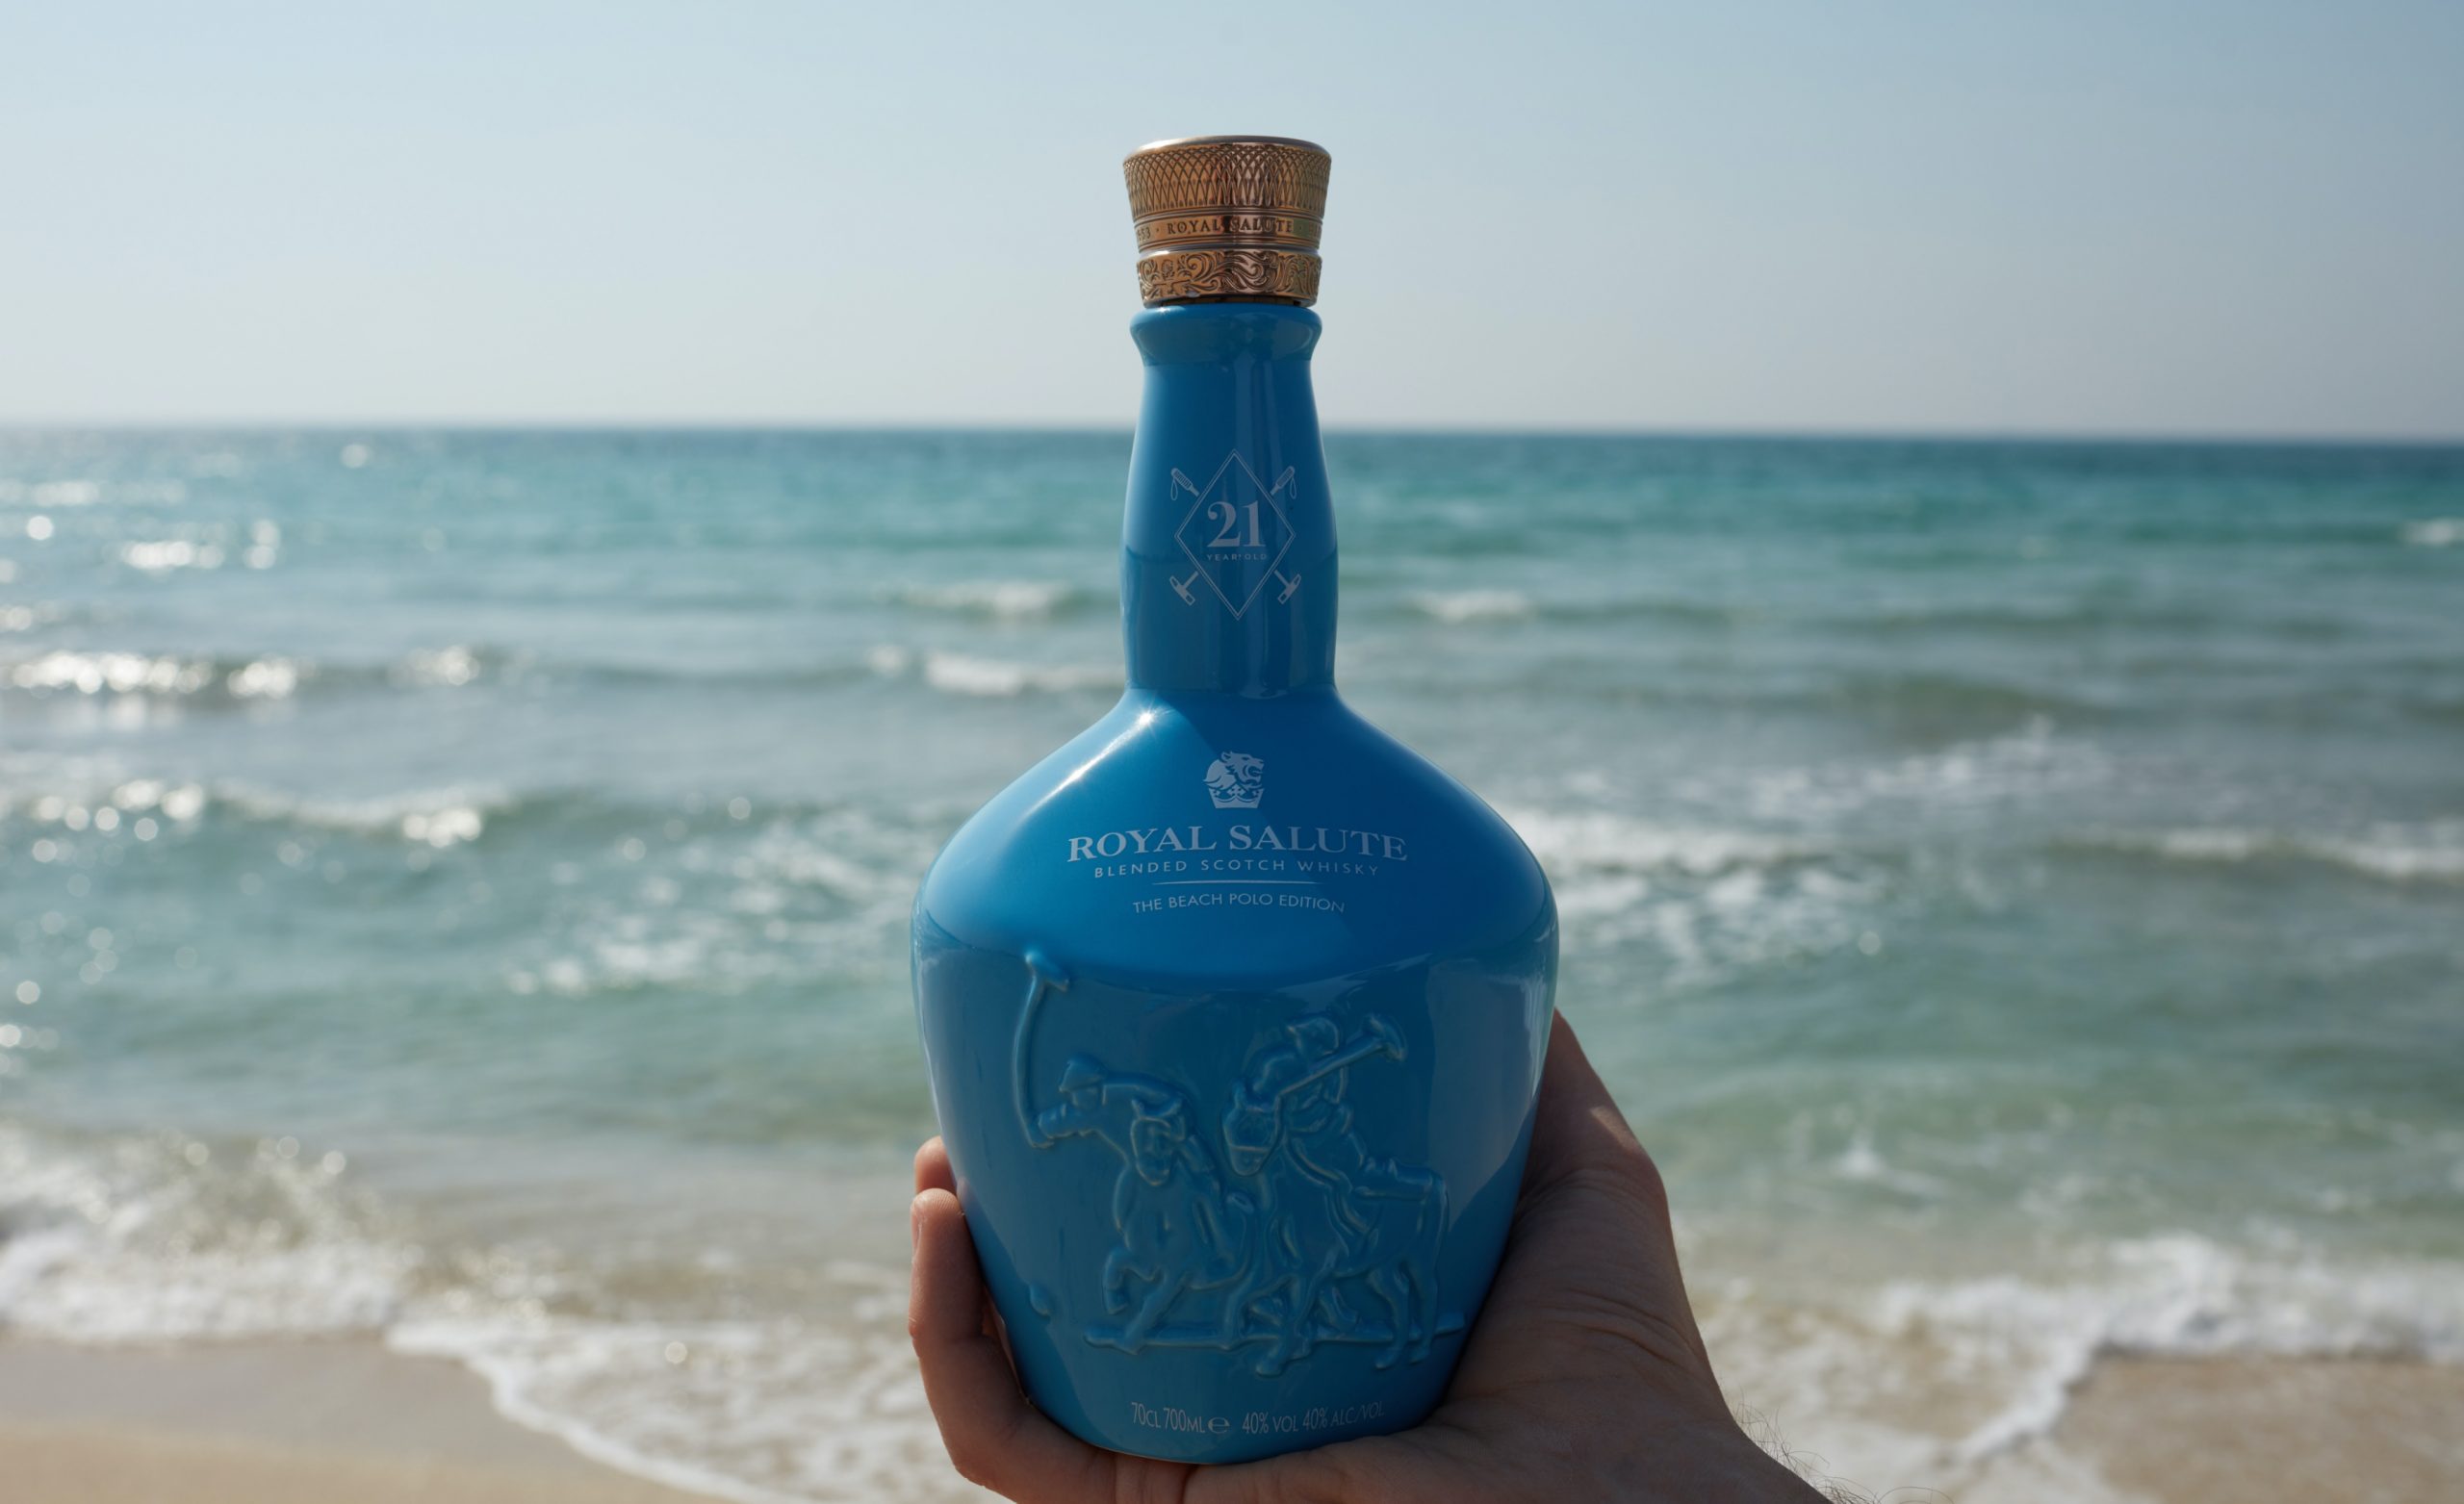 Royal Salute Blended Scotch Whisky The Beach Polo Edition